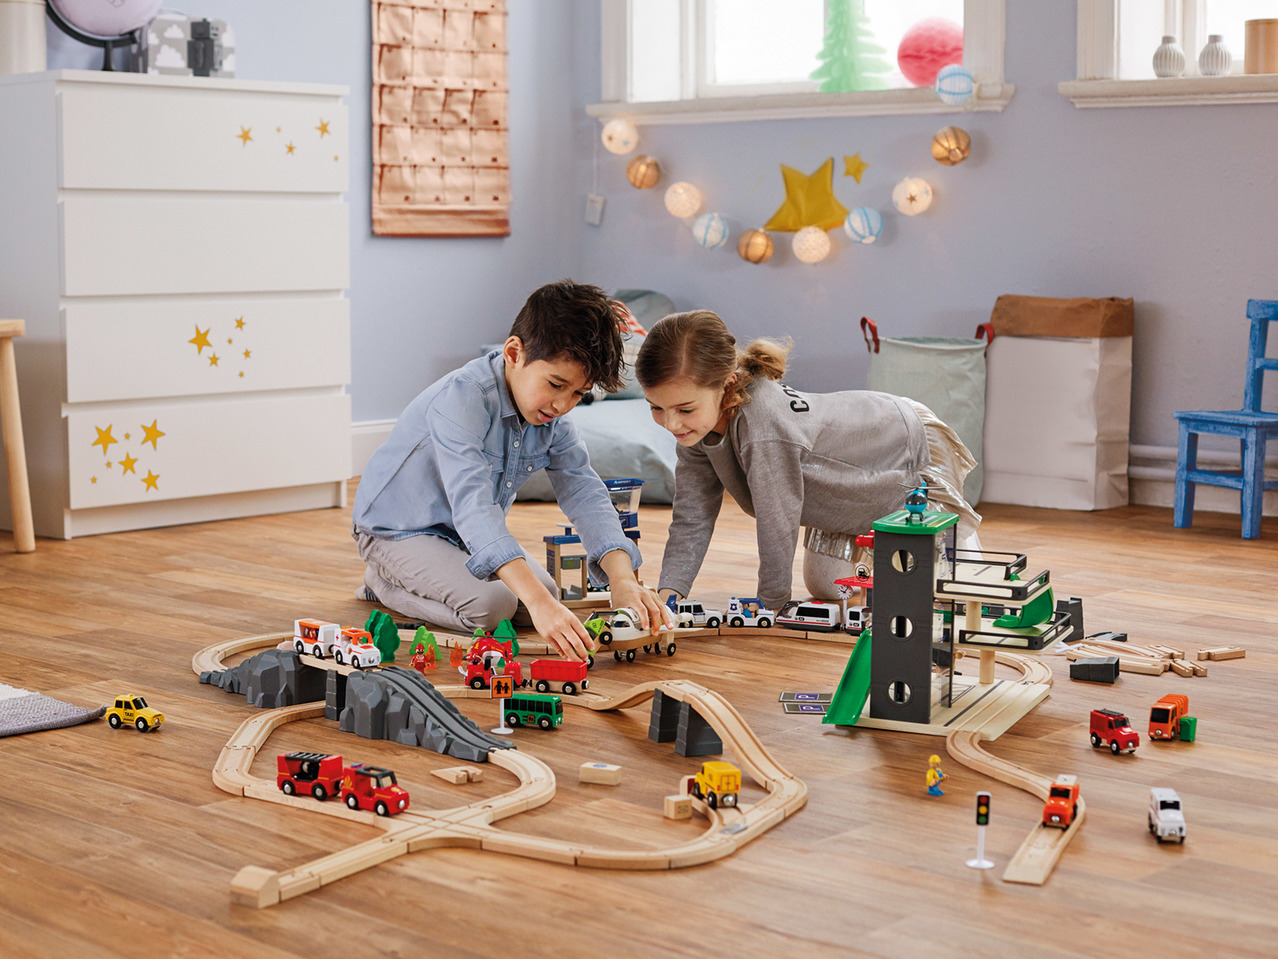 Playtive Junior Garage, Airport or Track Extensions1